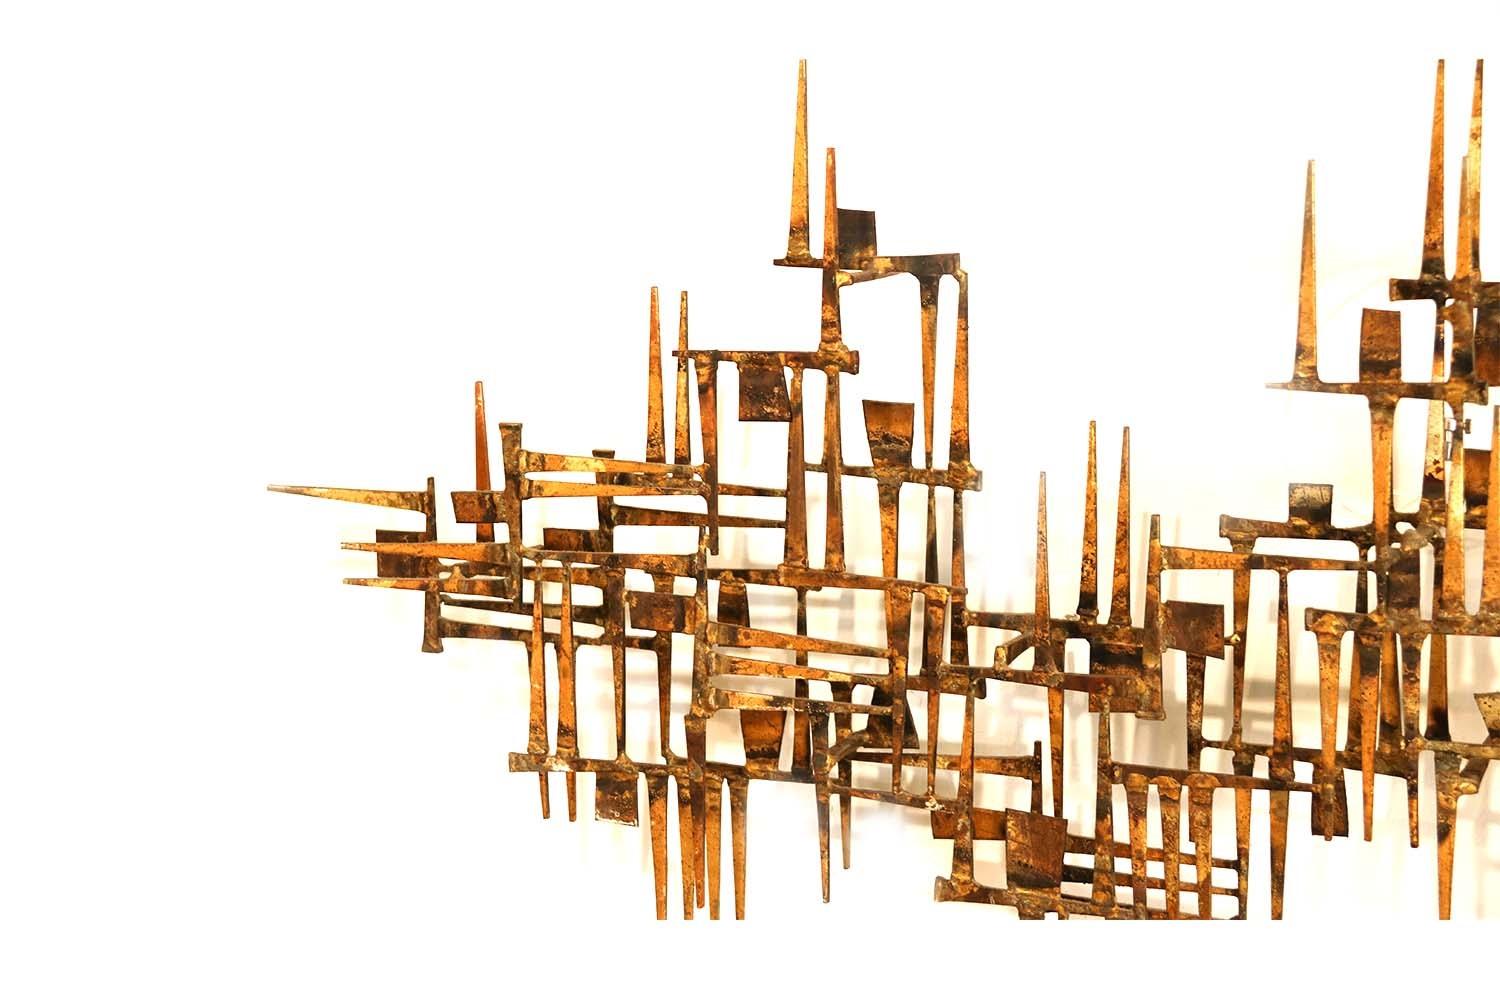 An impressive large wall nail sculpture in the style of William Bowie Harry Bertoia or C. Jere. Made to be mounted either horizontally or vertically, stands off the wall. Features amazing 3-dimensional hand welded and torch cut nail art with varying